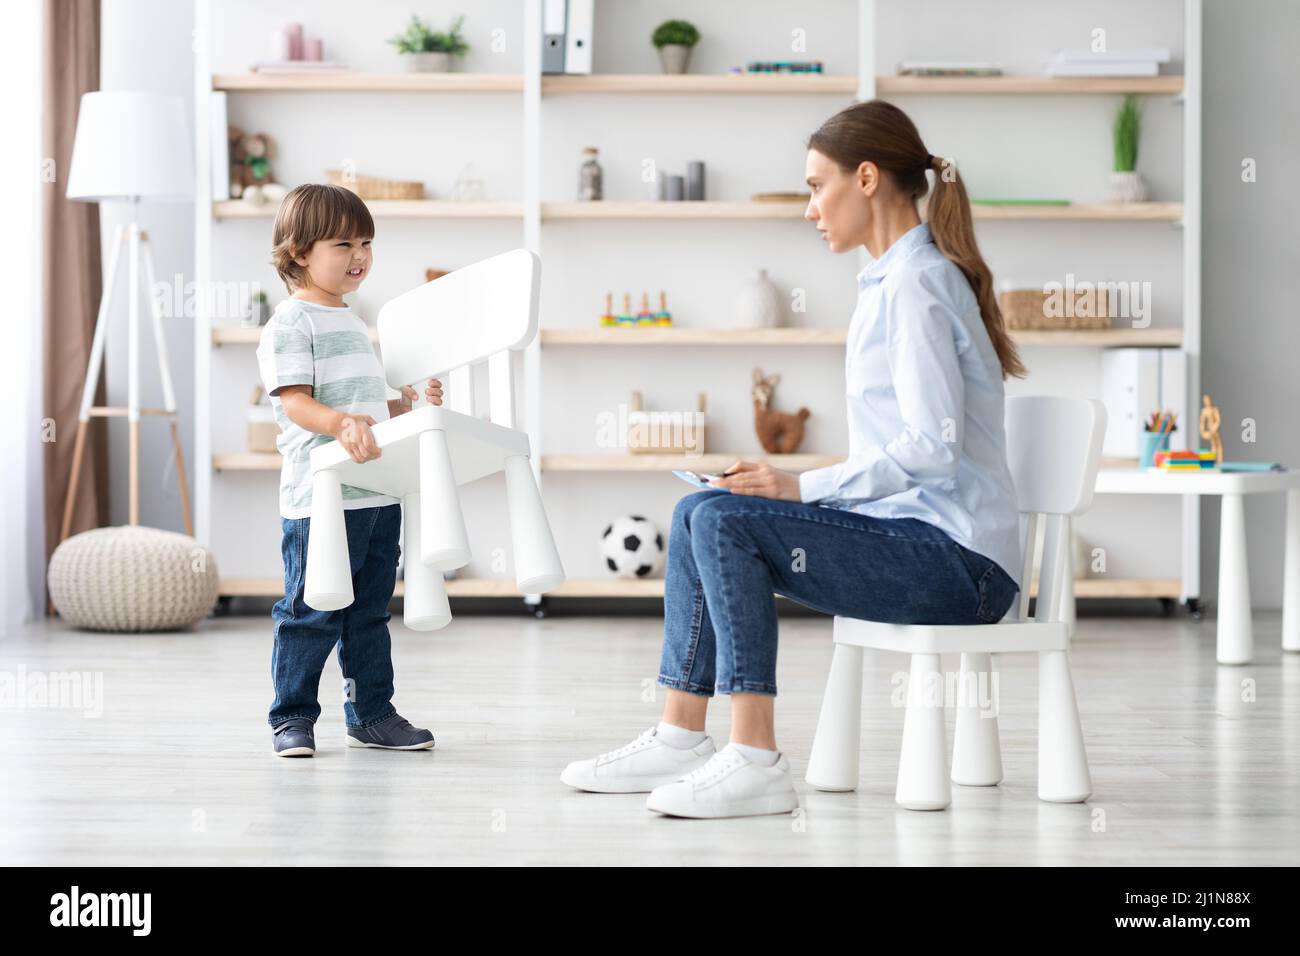 Furious emotional little boy grabbing chair in anger, shocked woman psychologist trying to work with difficult patient Stock Photo